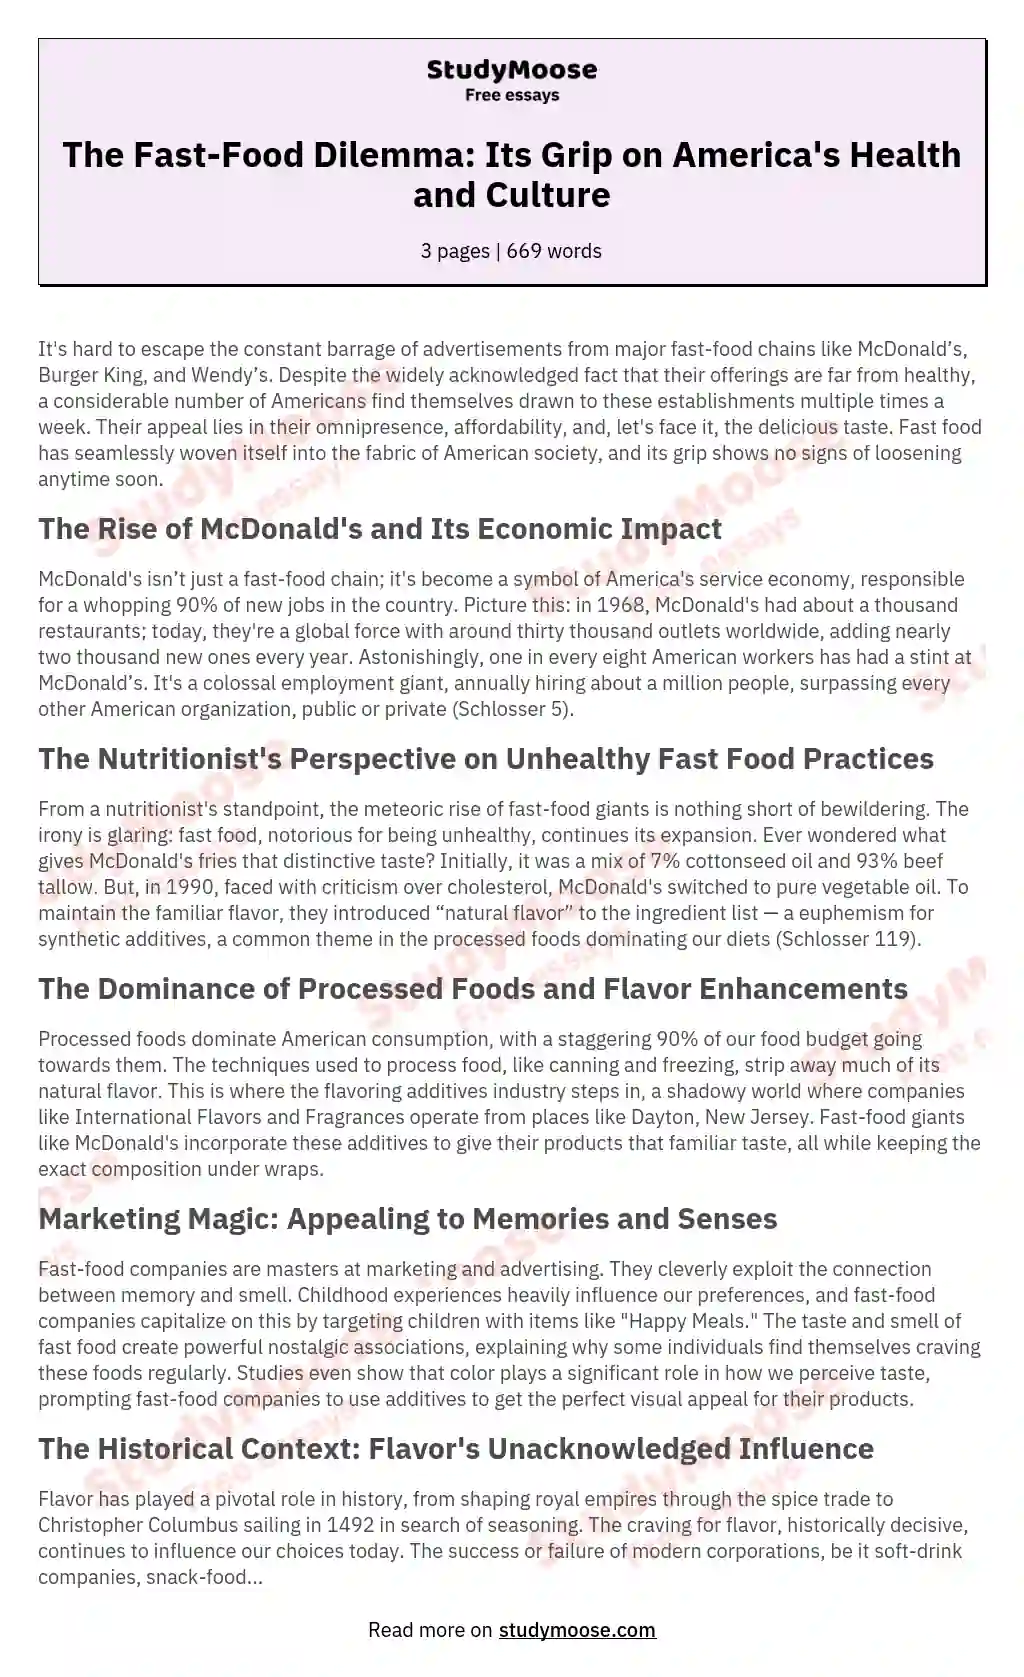 The Fast-Food Dilemma: Its Grip on America's Health and Culture essay